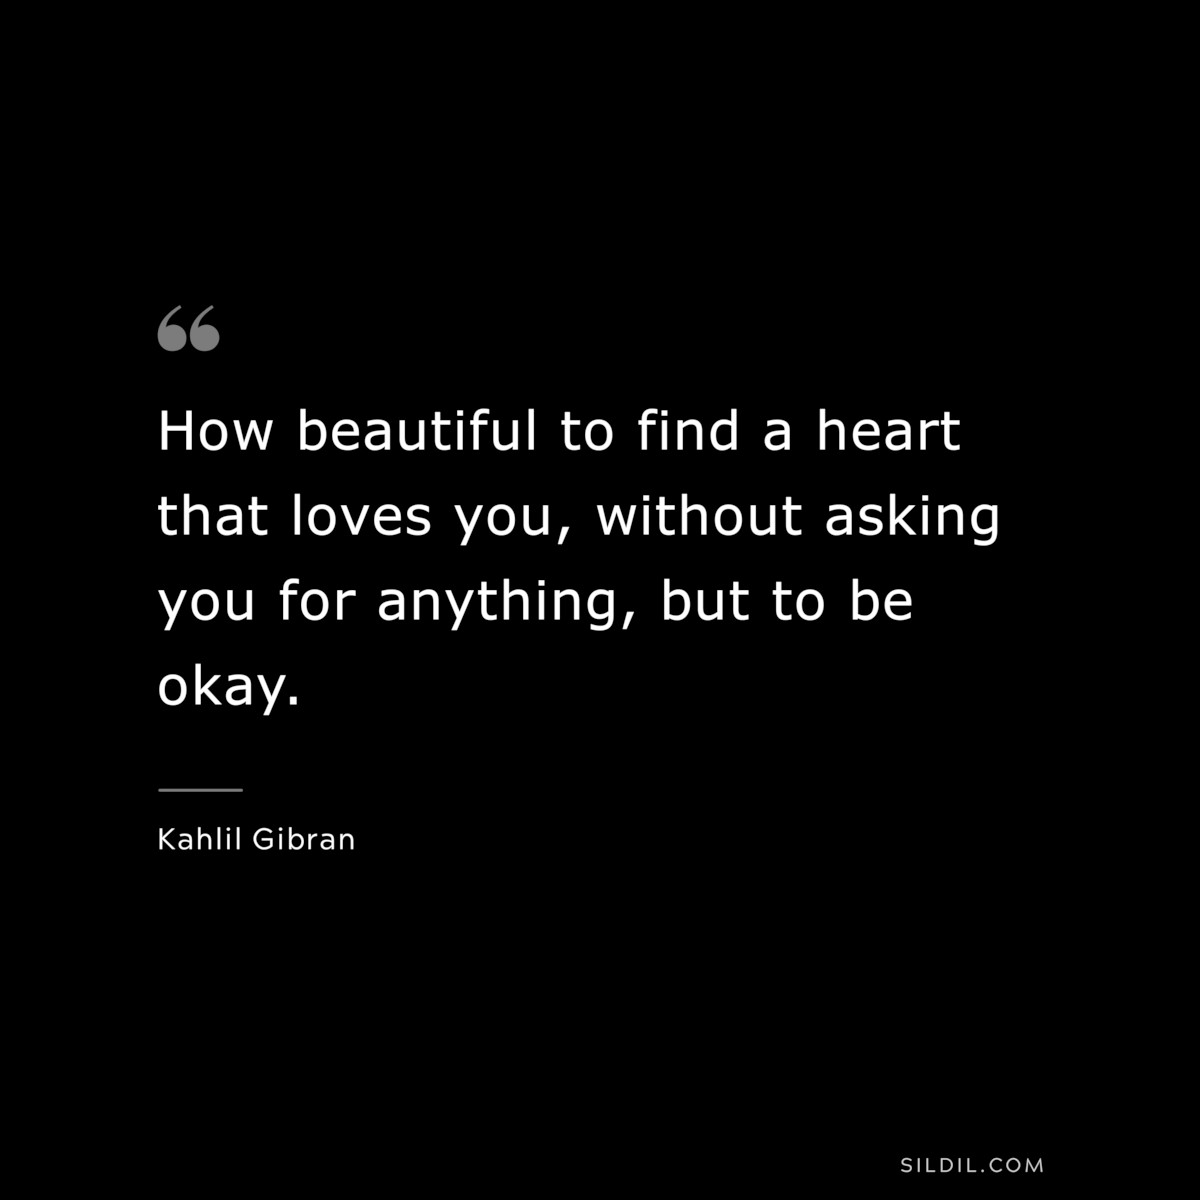 How beautiful to find a heart that loves you, without asking you for anything, but to be okay. ― Kahlil Gibran